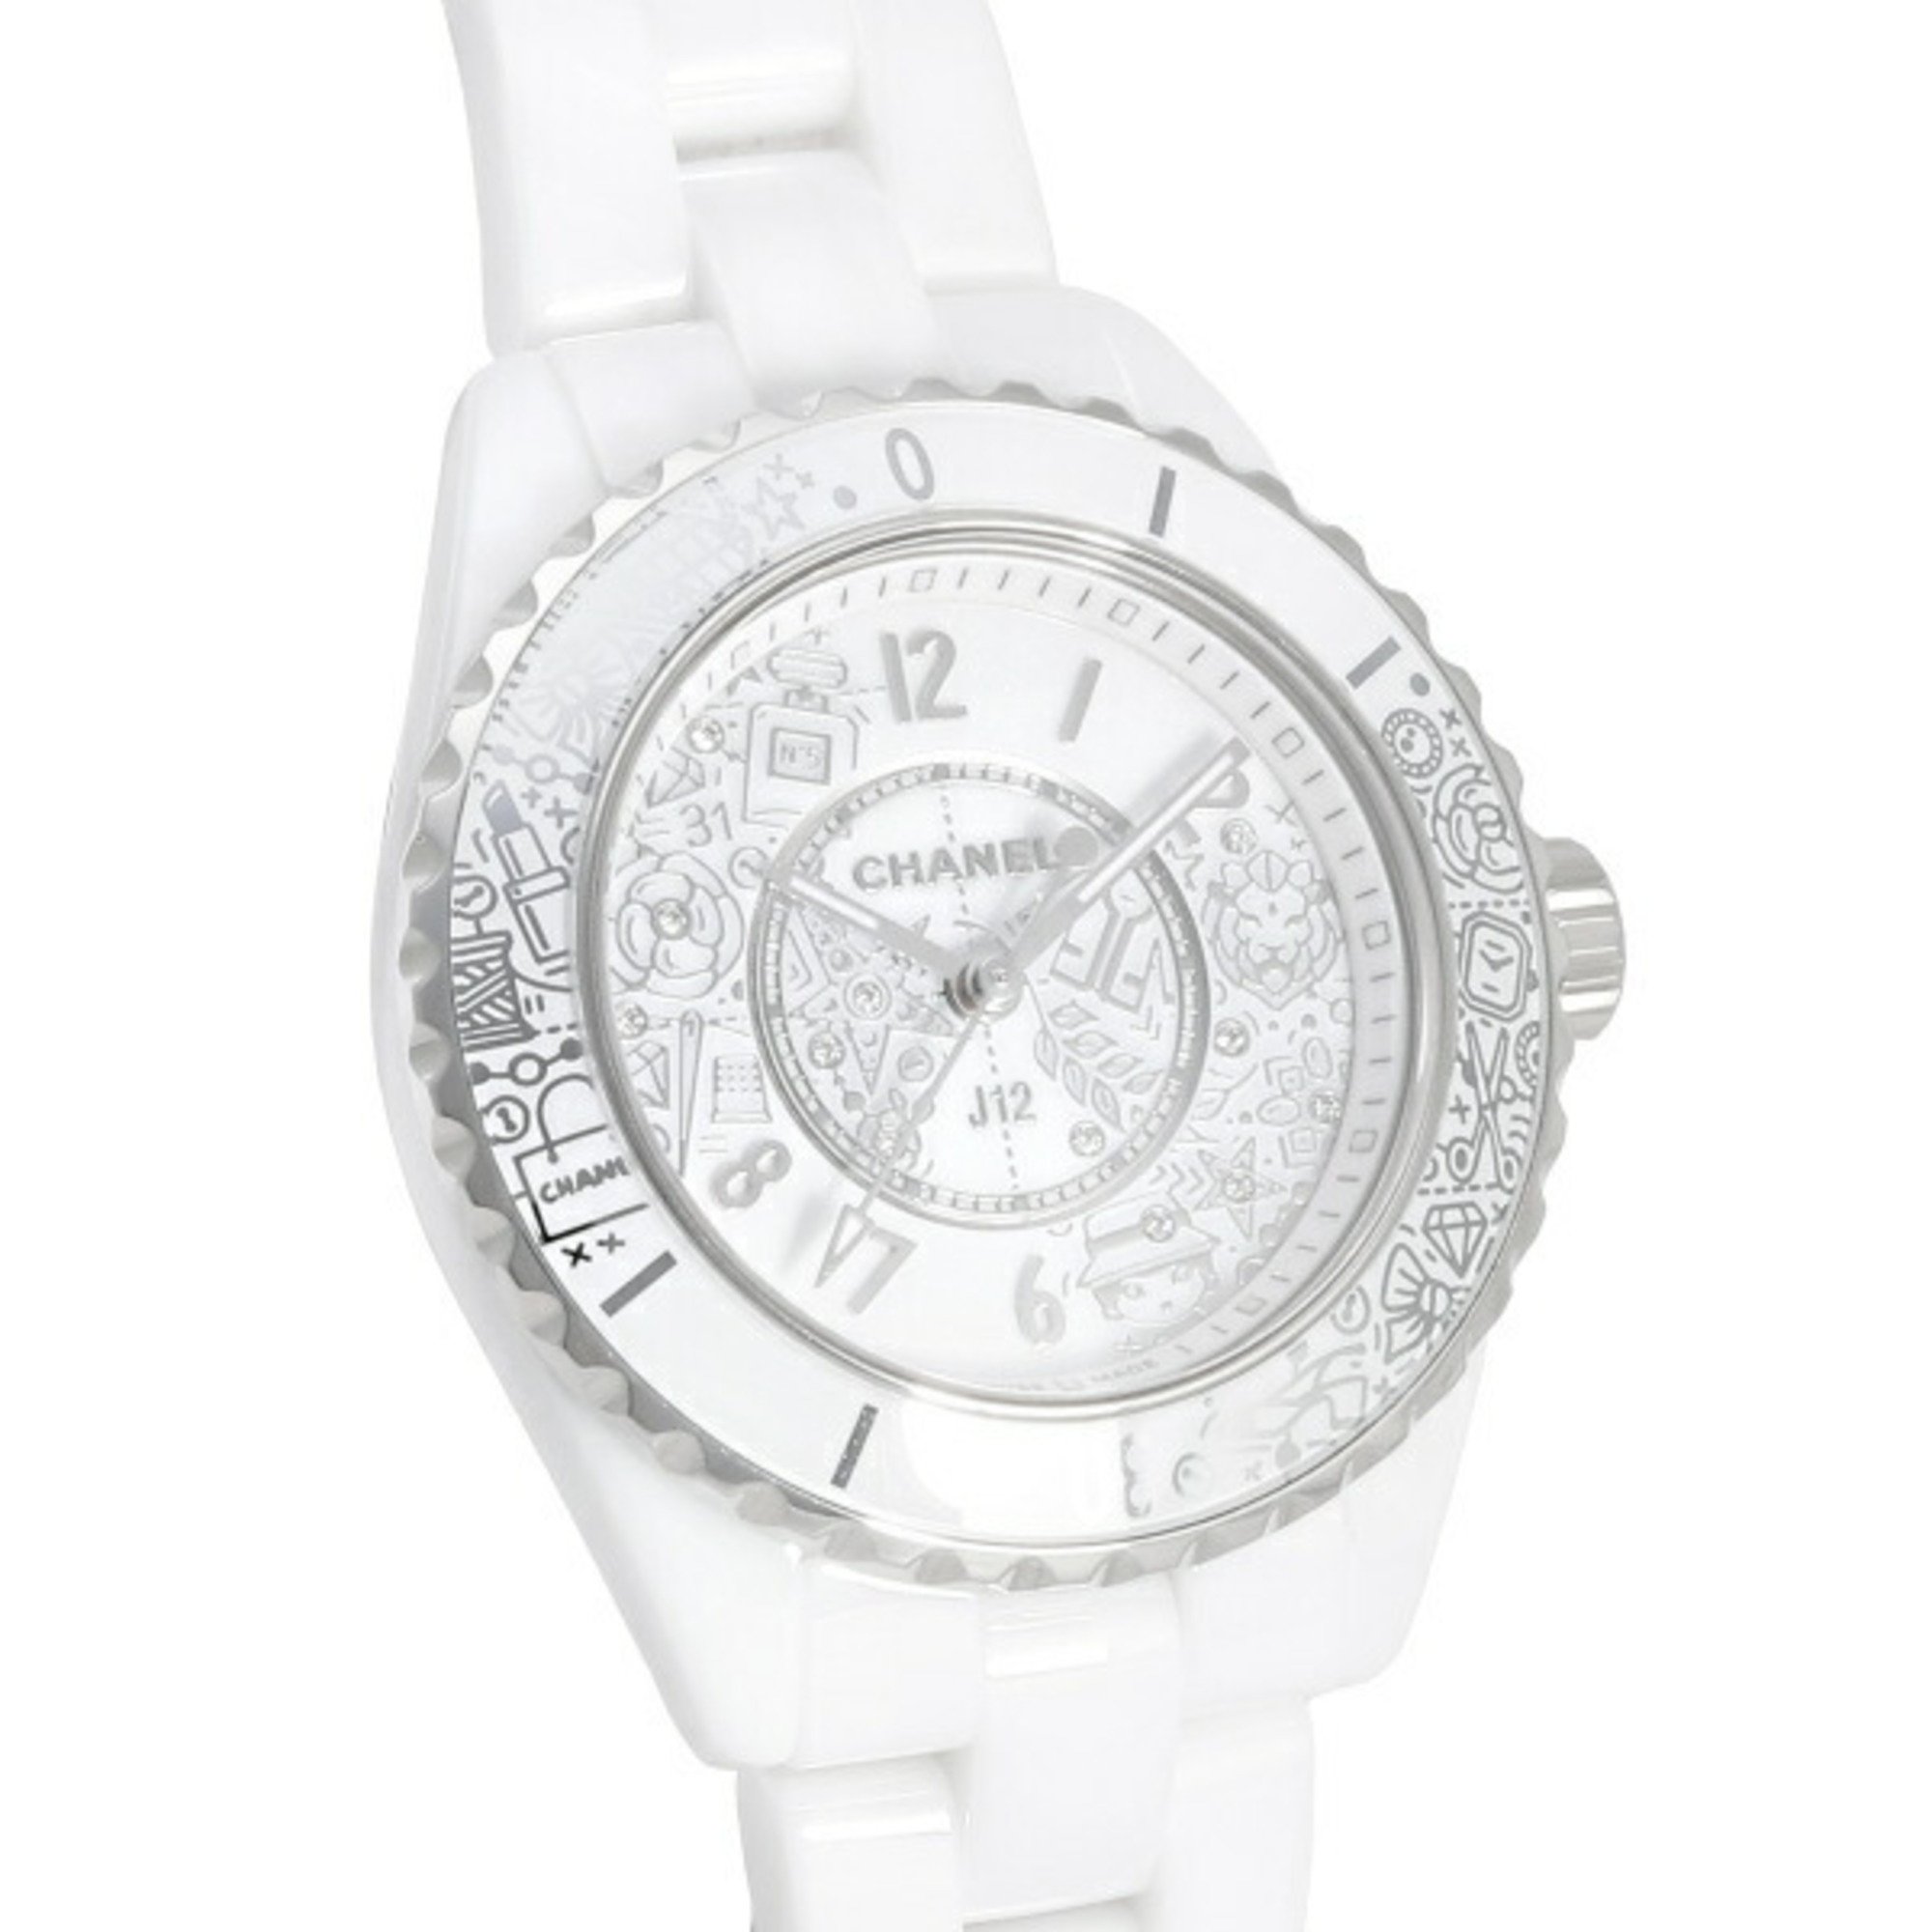 CHANEL J12 20 20th Anniversary Model World Limited 2020 Pieces H6477 White Dial Watch Ladies